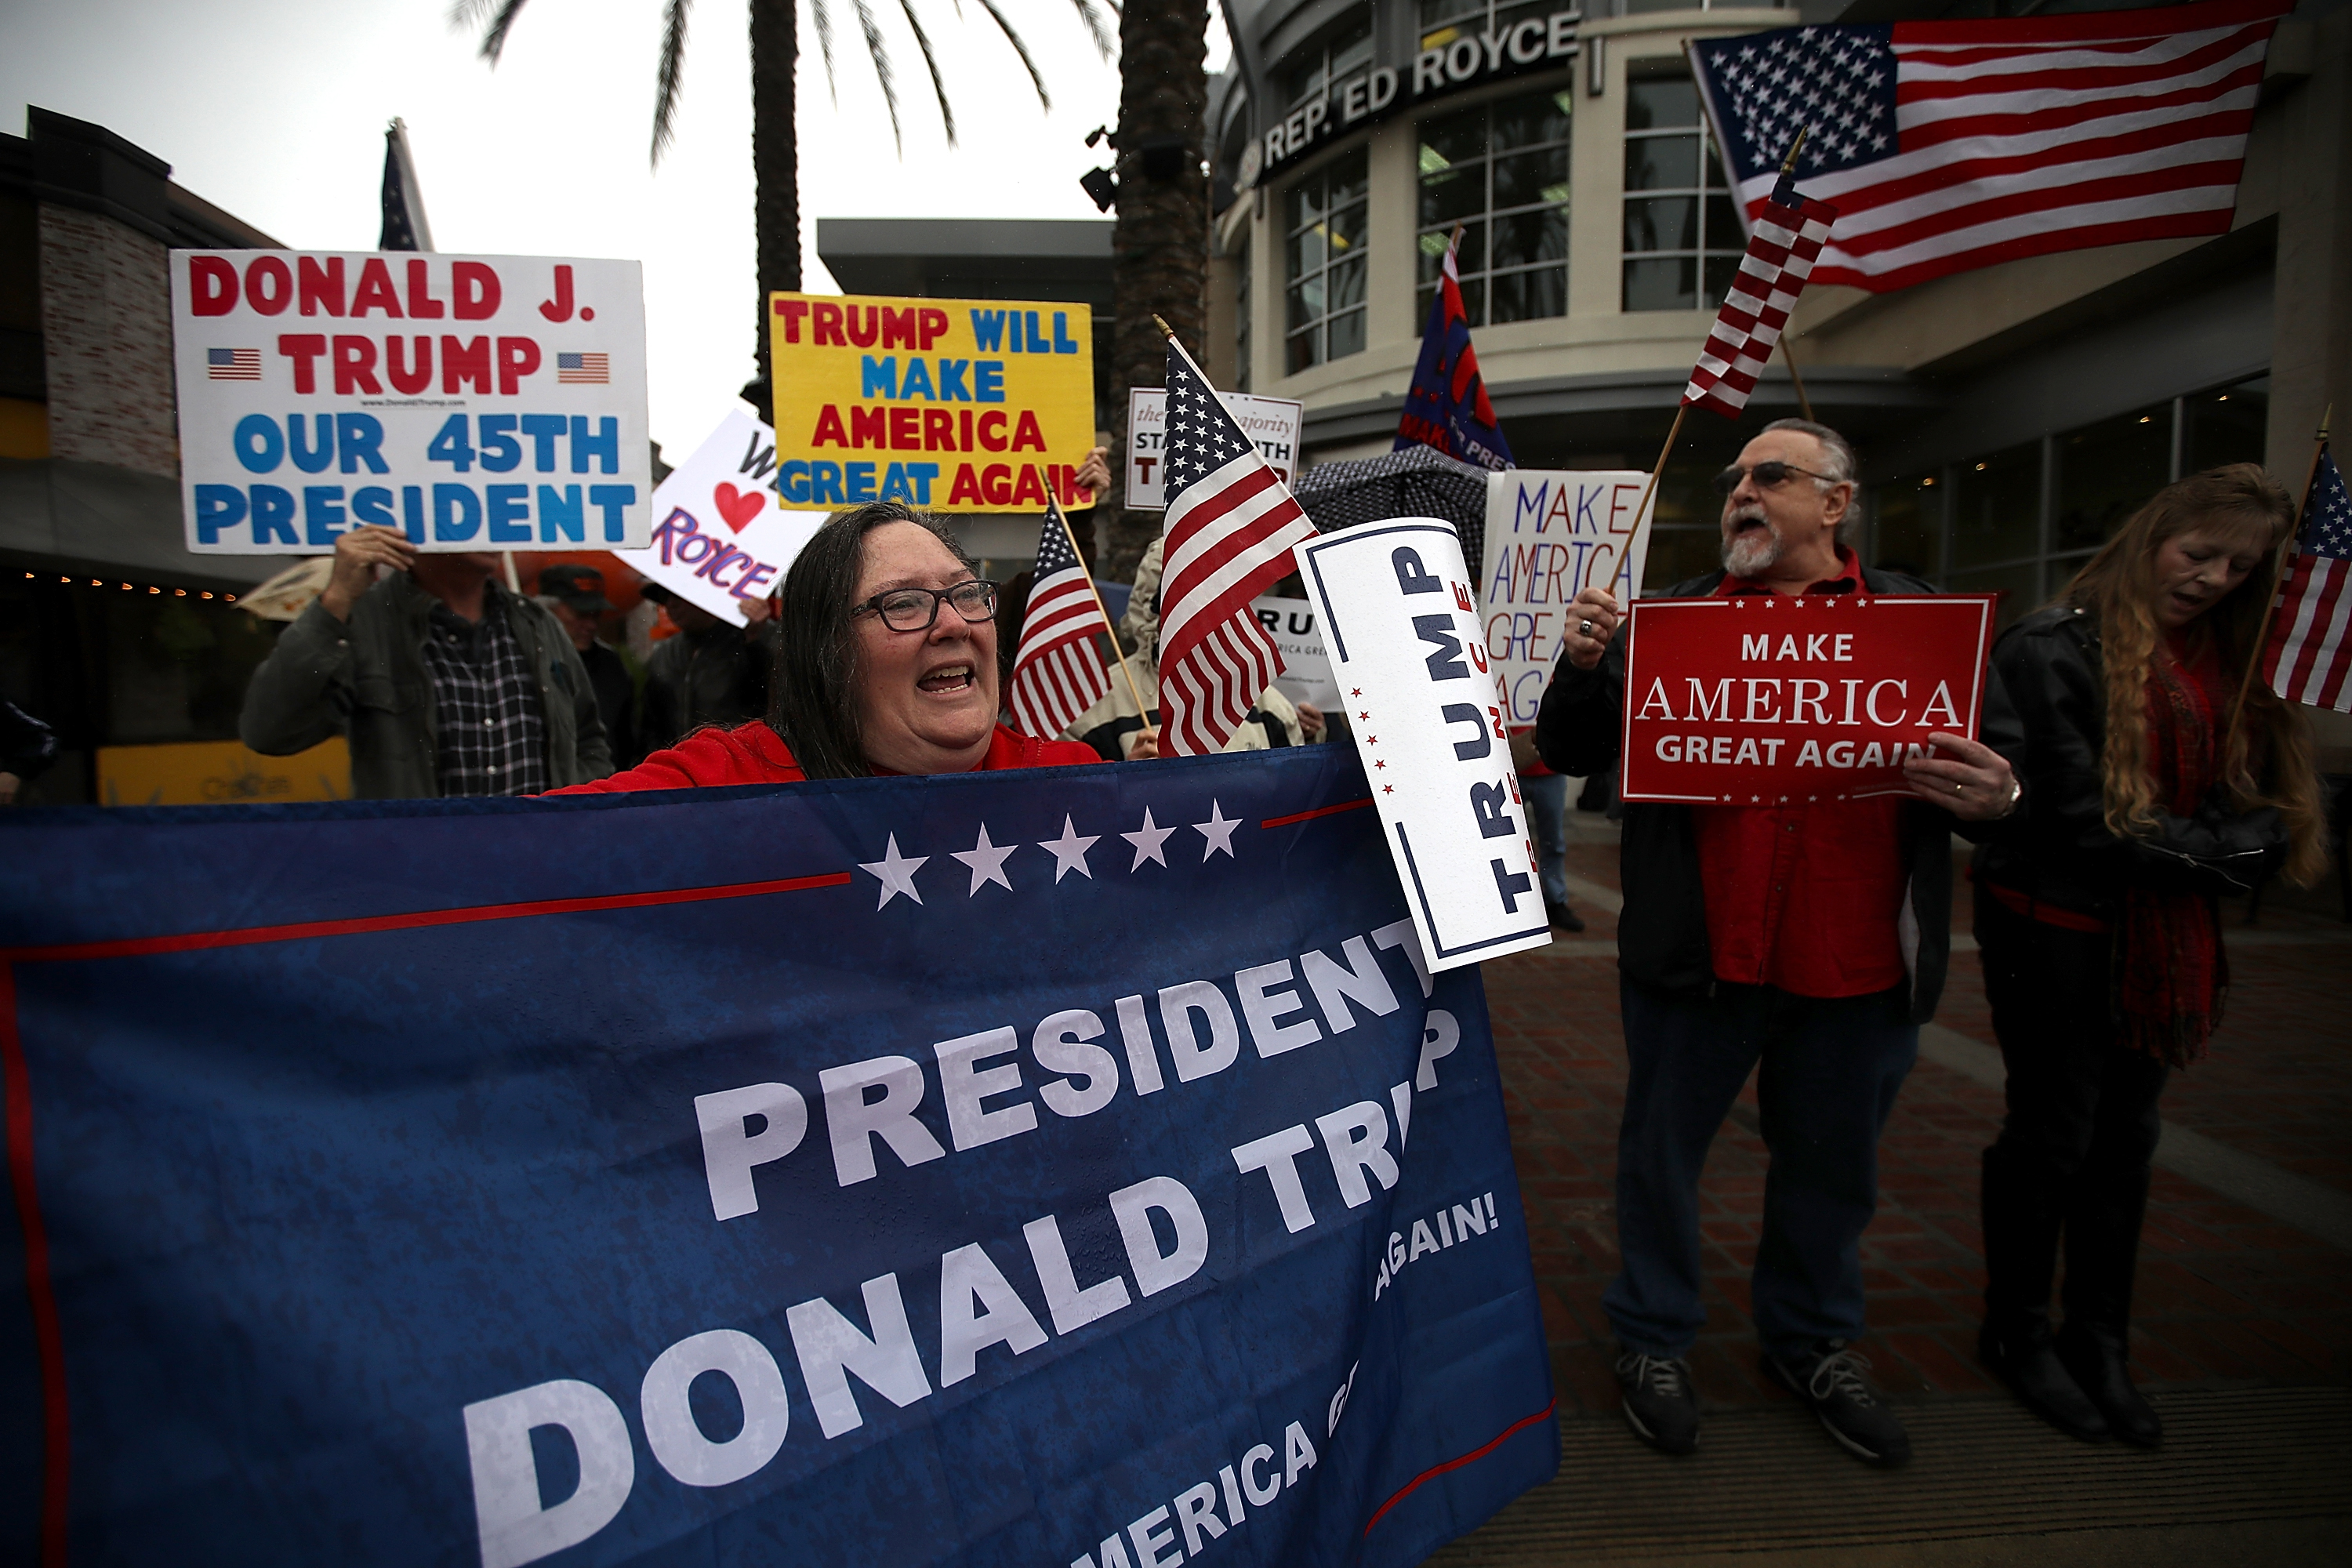 Supporters of U.S. President Donald Trump hold signs during a rally in favor of the "America First" agenda on February 27, 2017 in Brea, California. (Justin Sullivan—Getty Images)